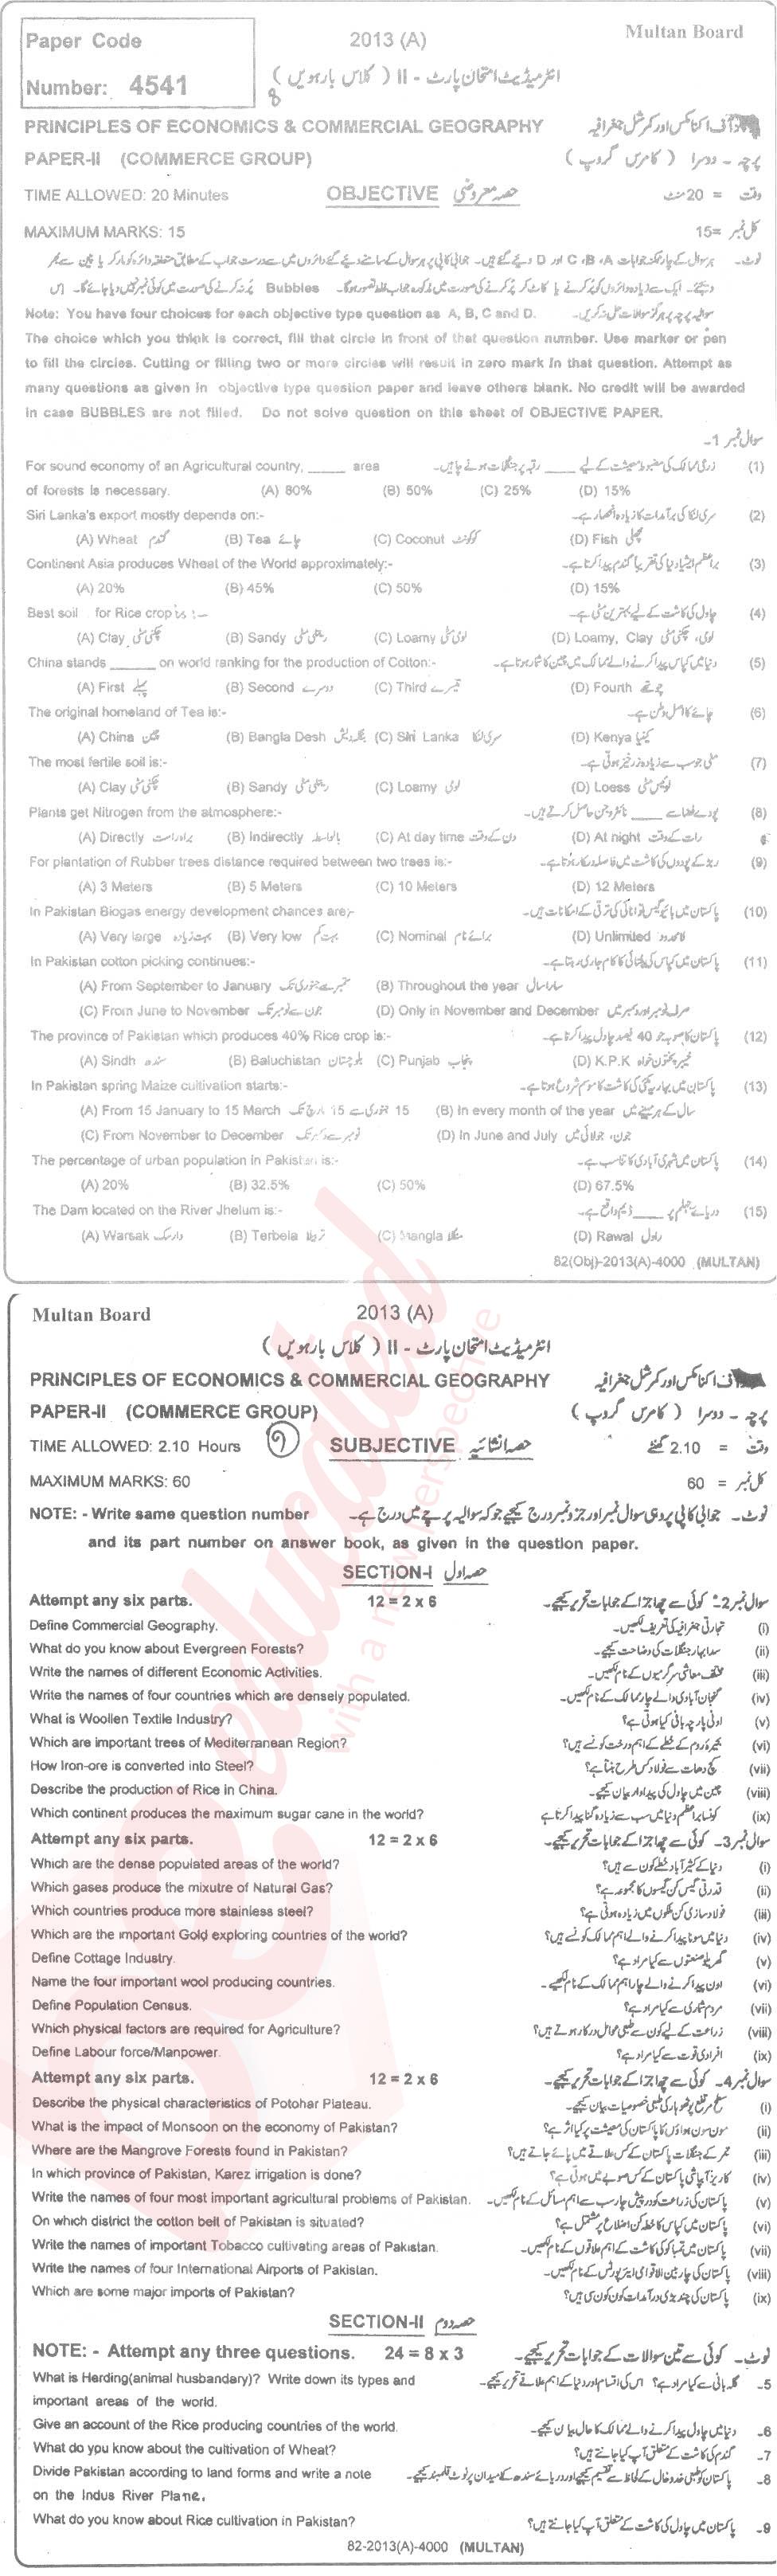 Commercial Geography ICOM Part 2 Past Paper Group 1 BISE Multan 2013